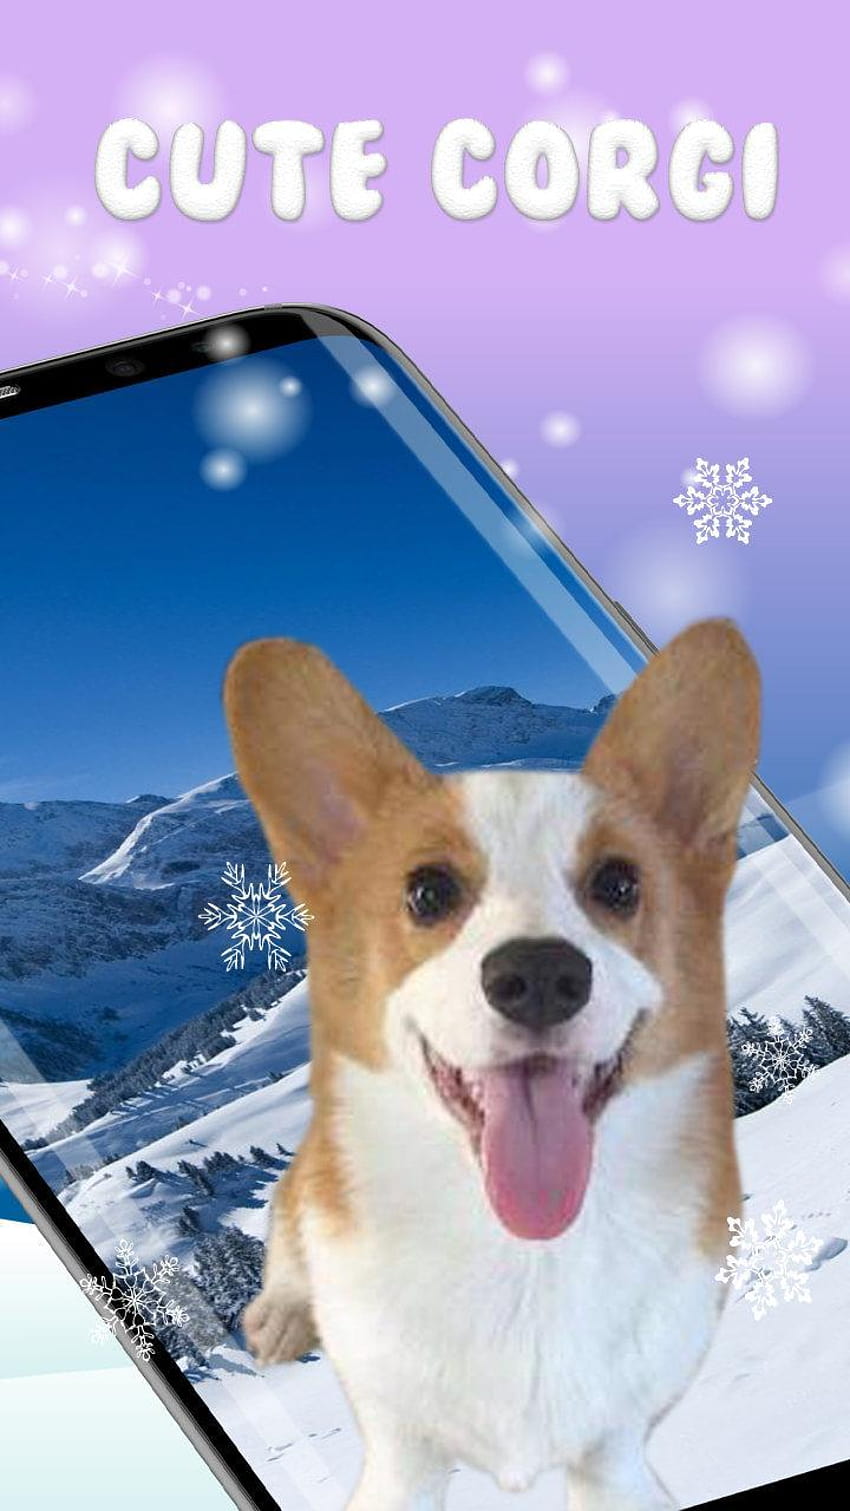 3D Rump Shaking Corgi Dog ThemeLive for Android APK [720x1280] for your , Mobile & Tablet HD phone wallpaper